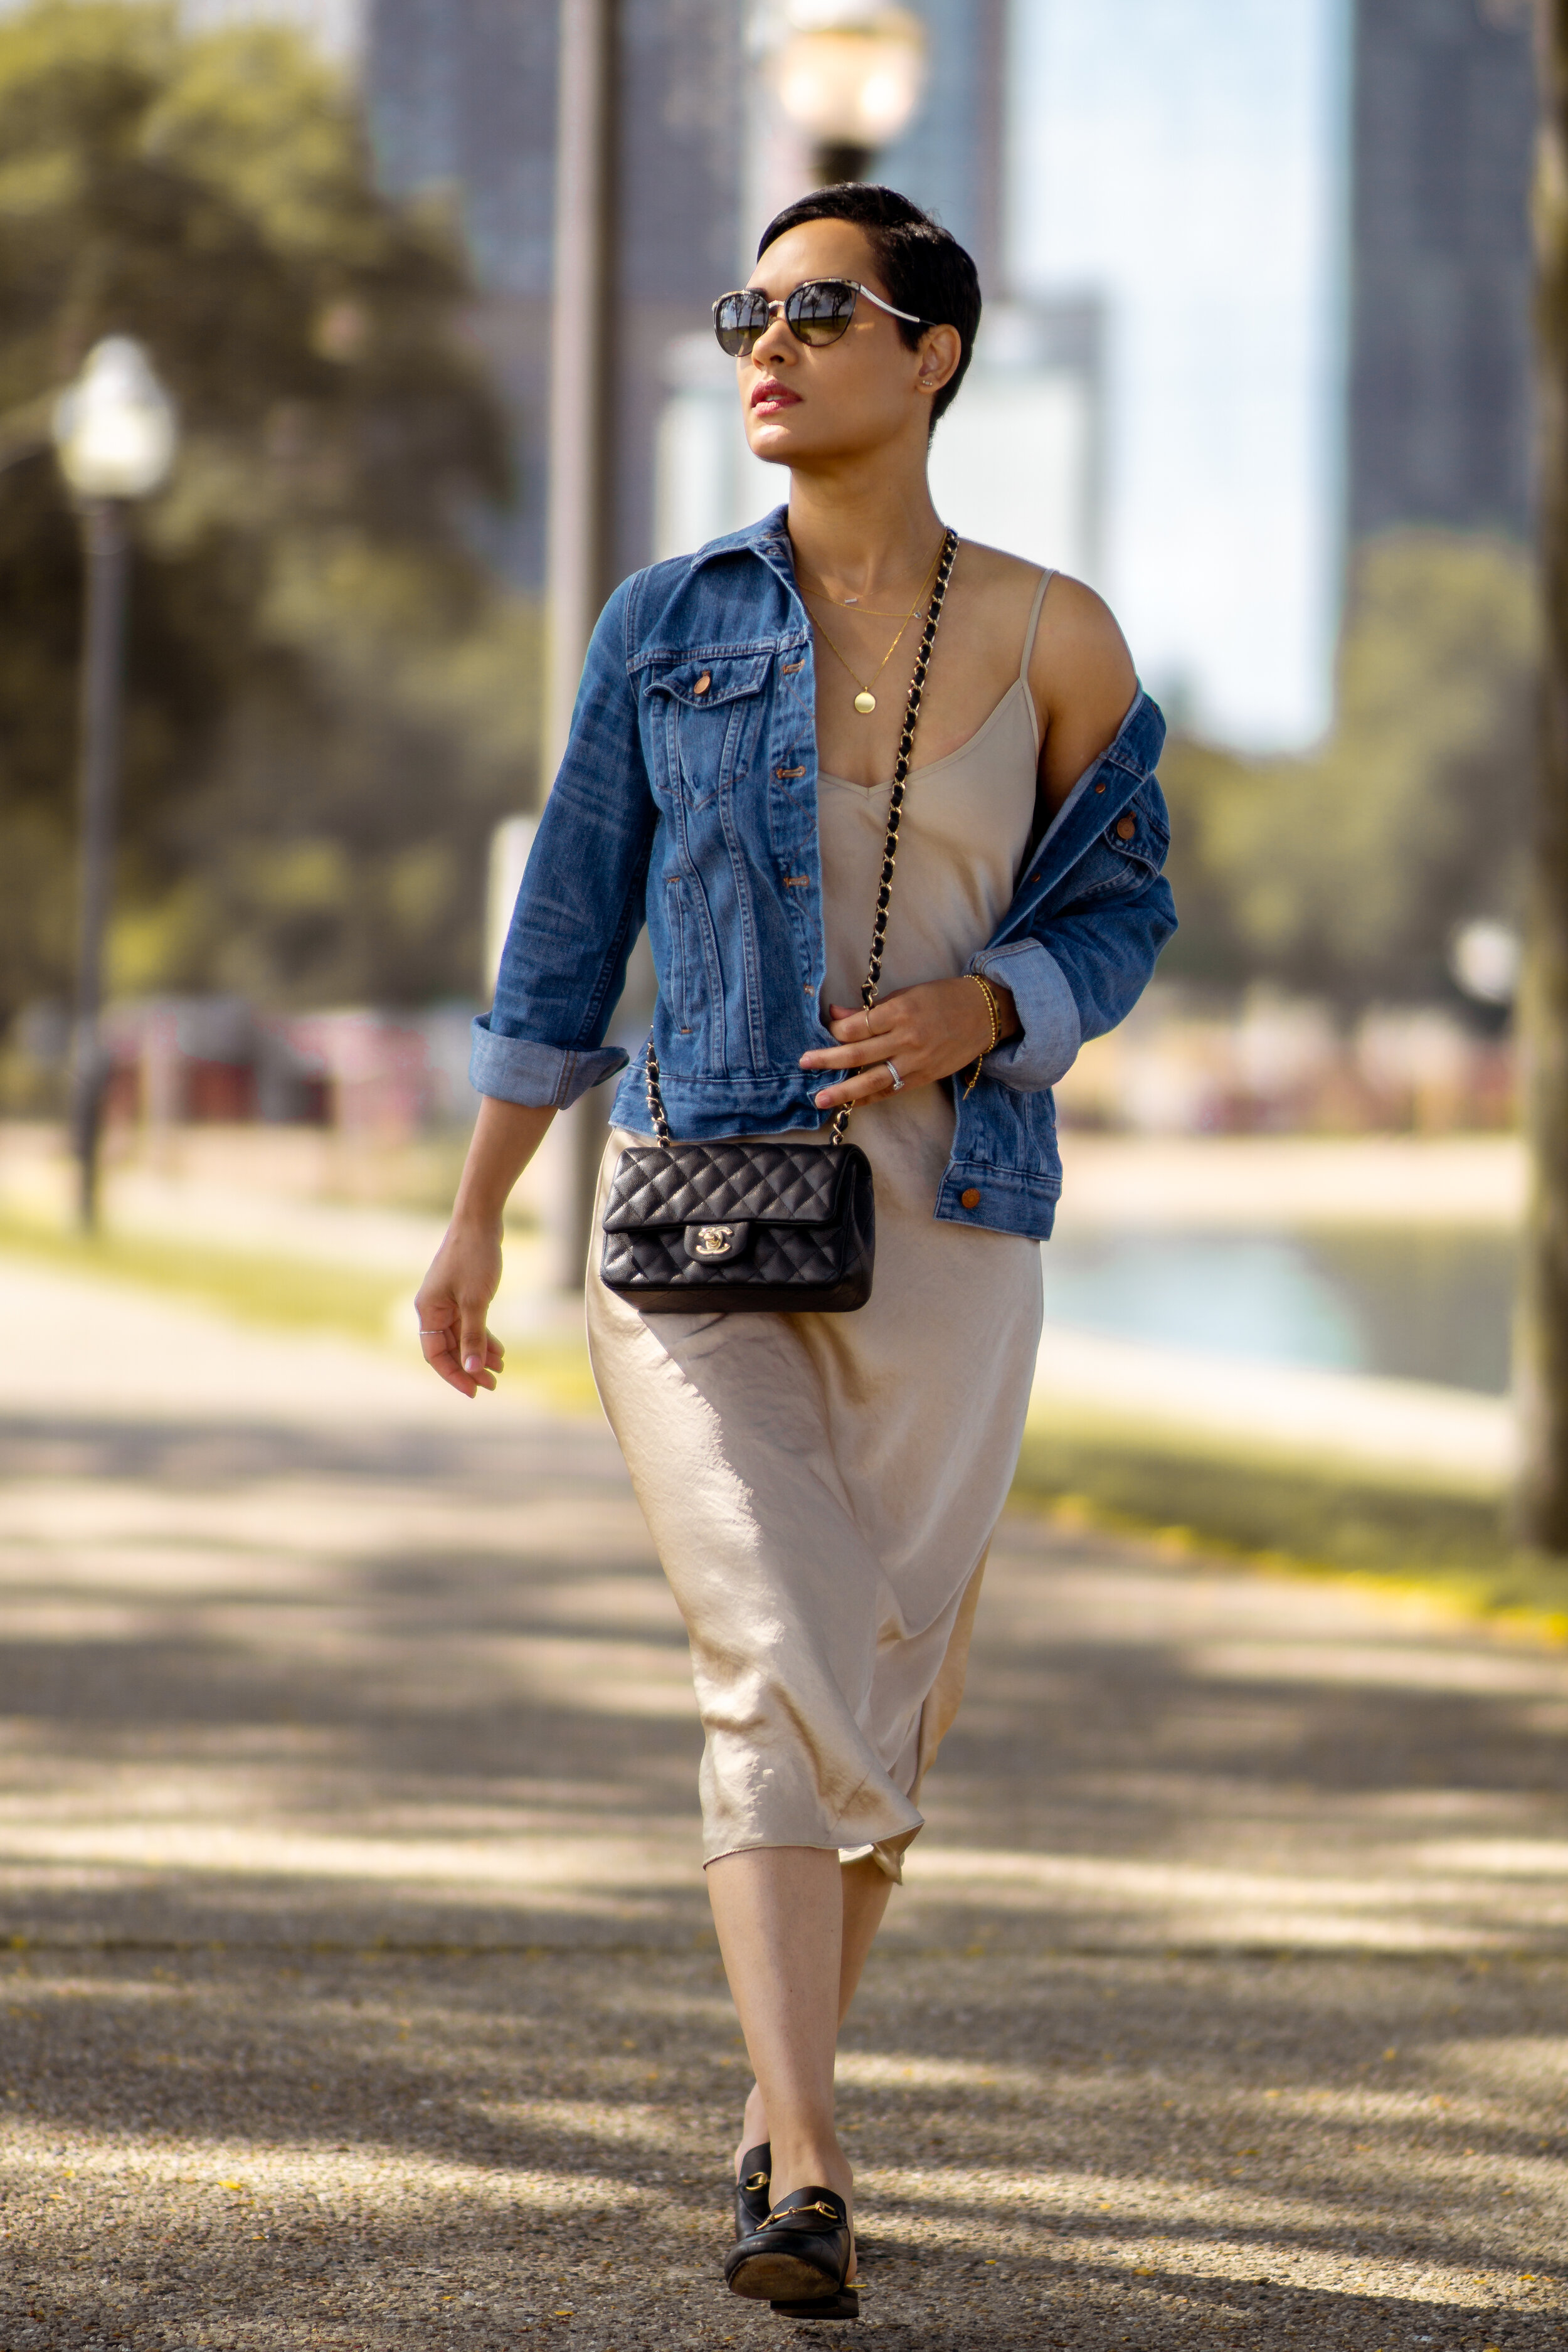 How to Wear Your Favorite Slip Dress in Fall - theFashionSpot